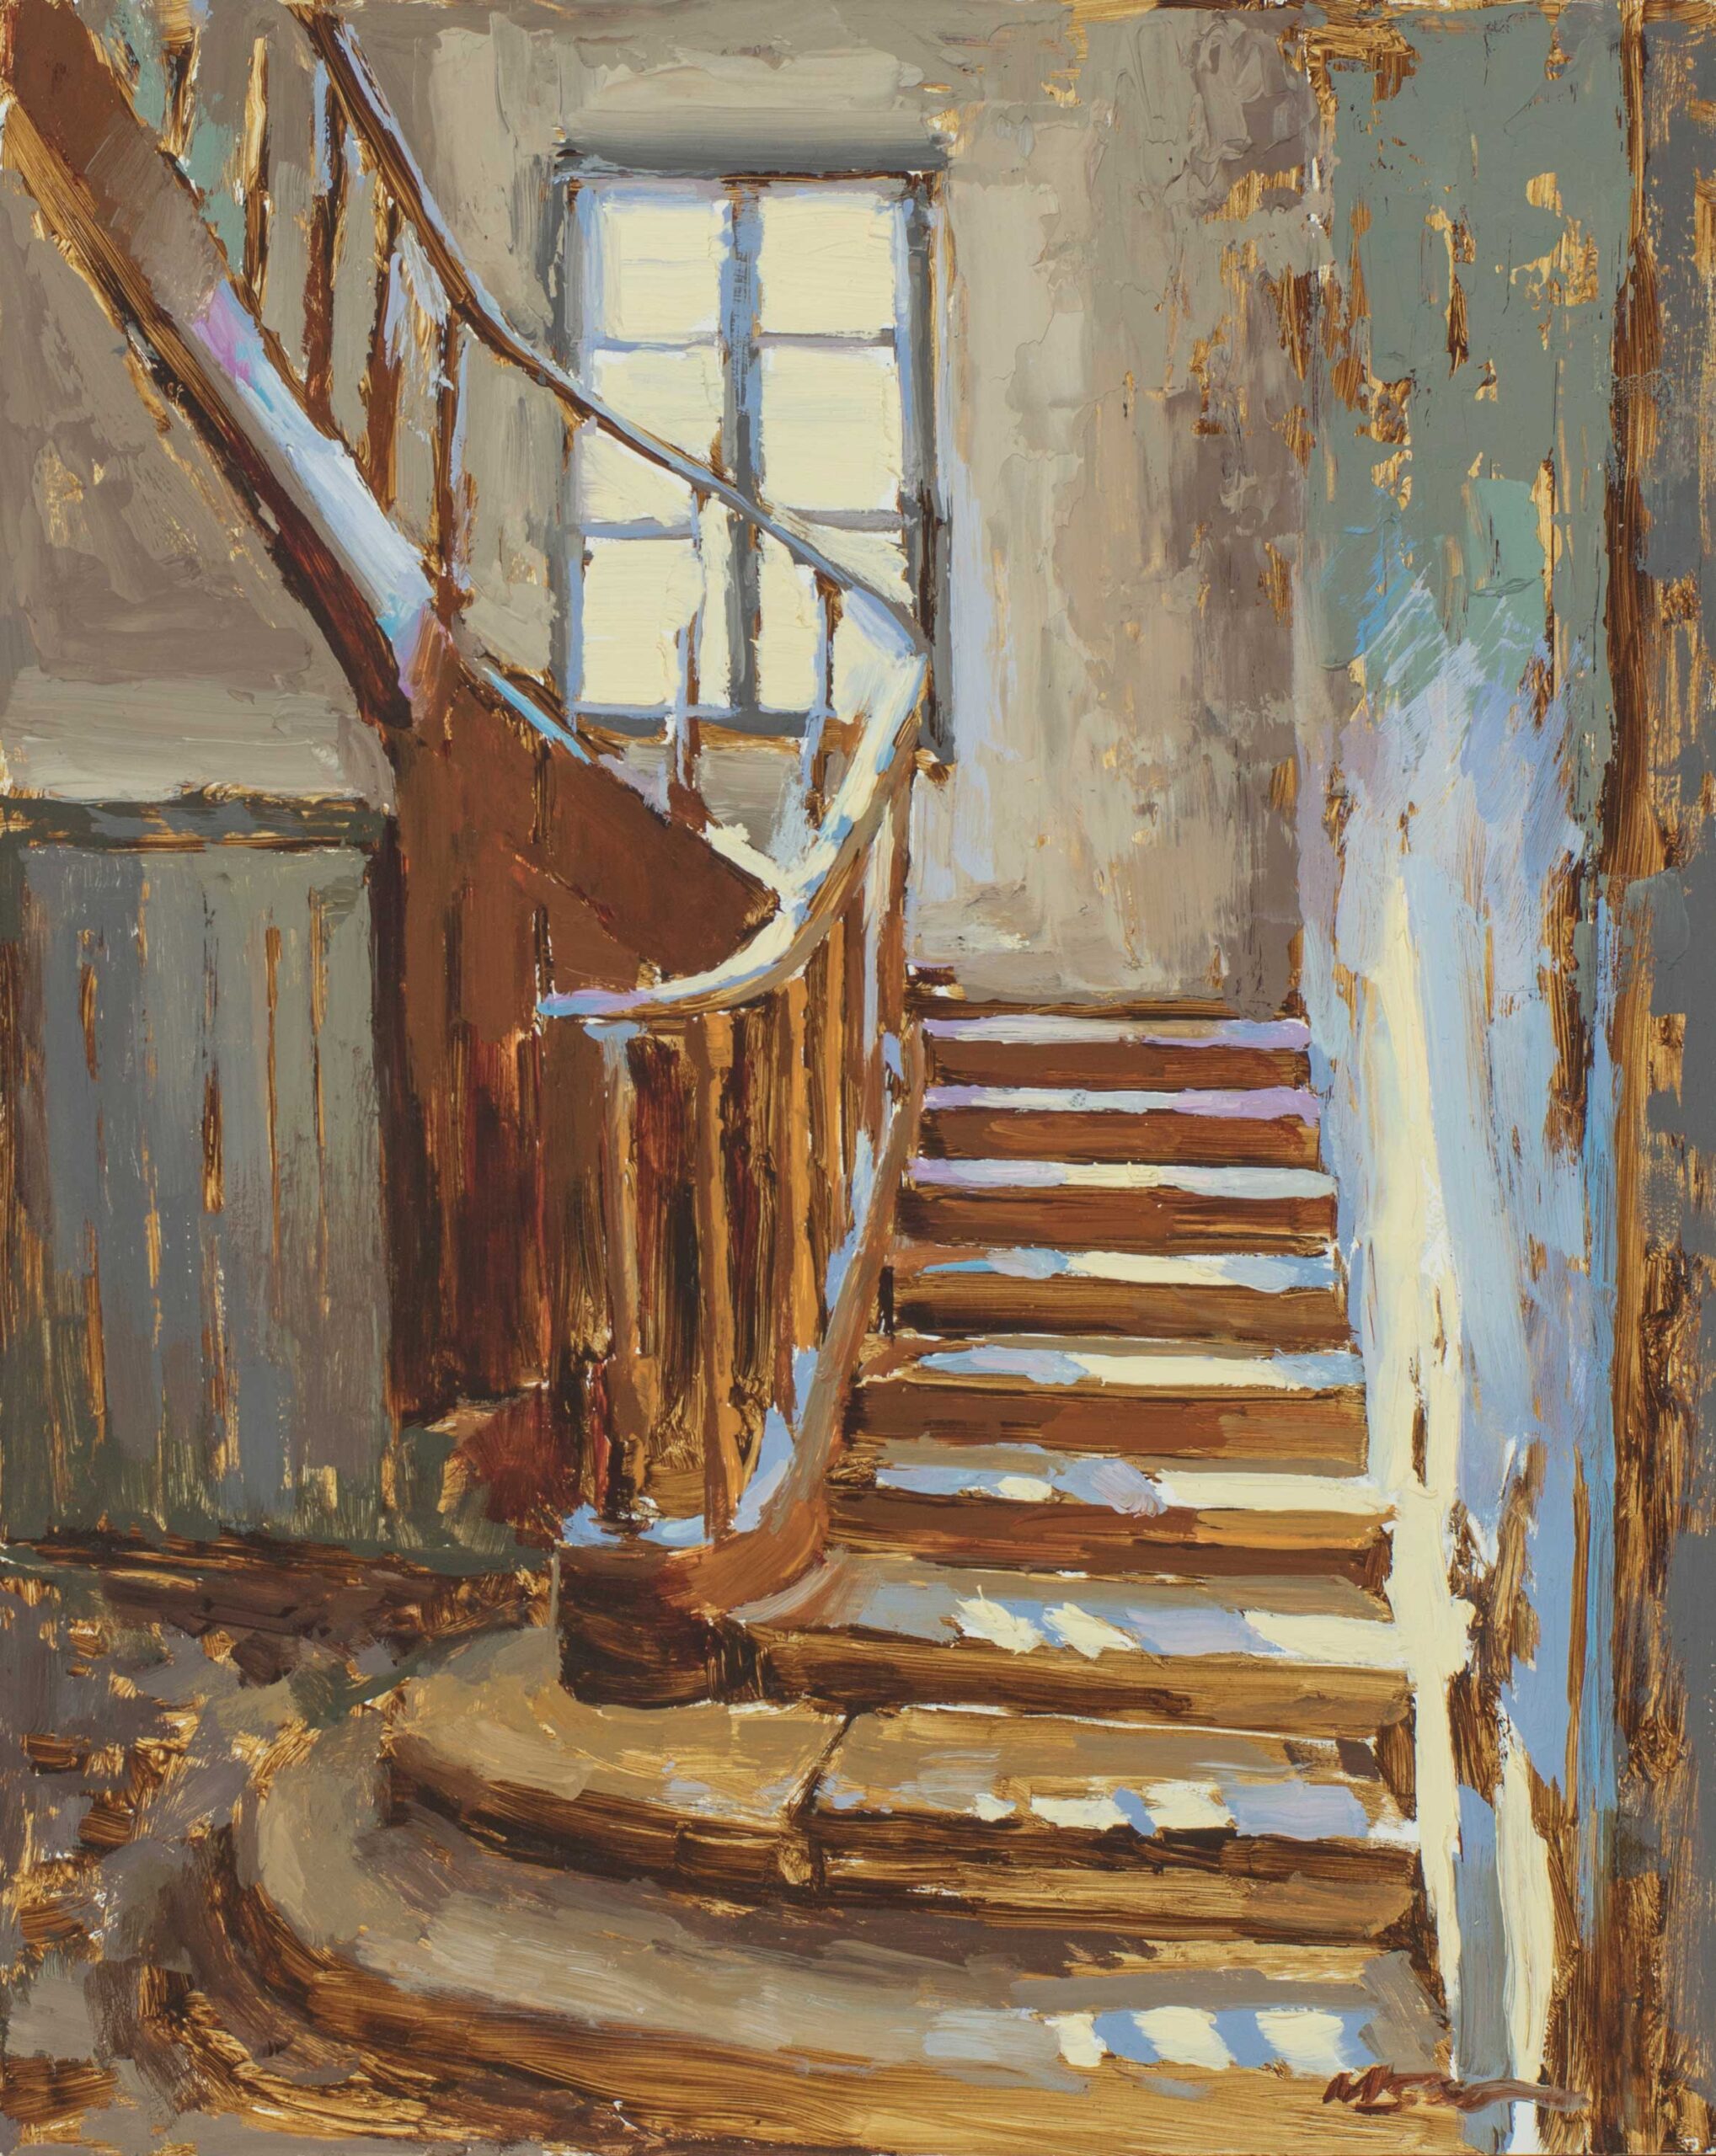 Mary Sauer, "The Winding Ancient Stair," 10 x 8 inches, Oil on Panel, 2023